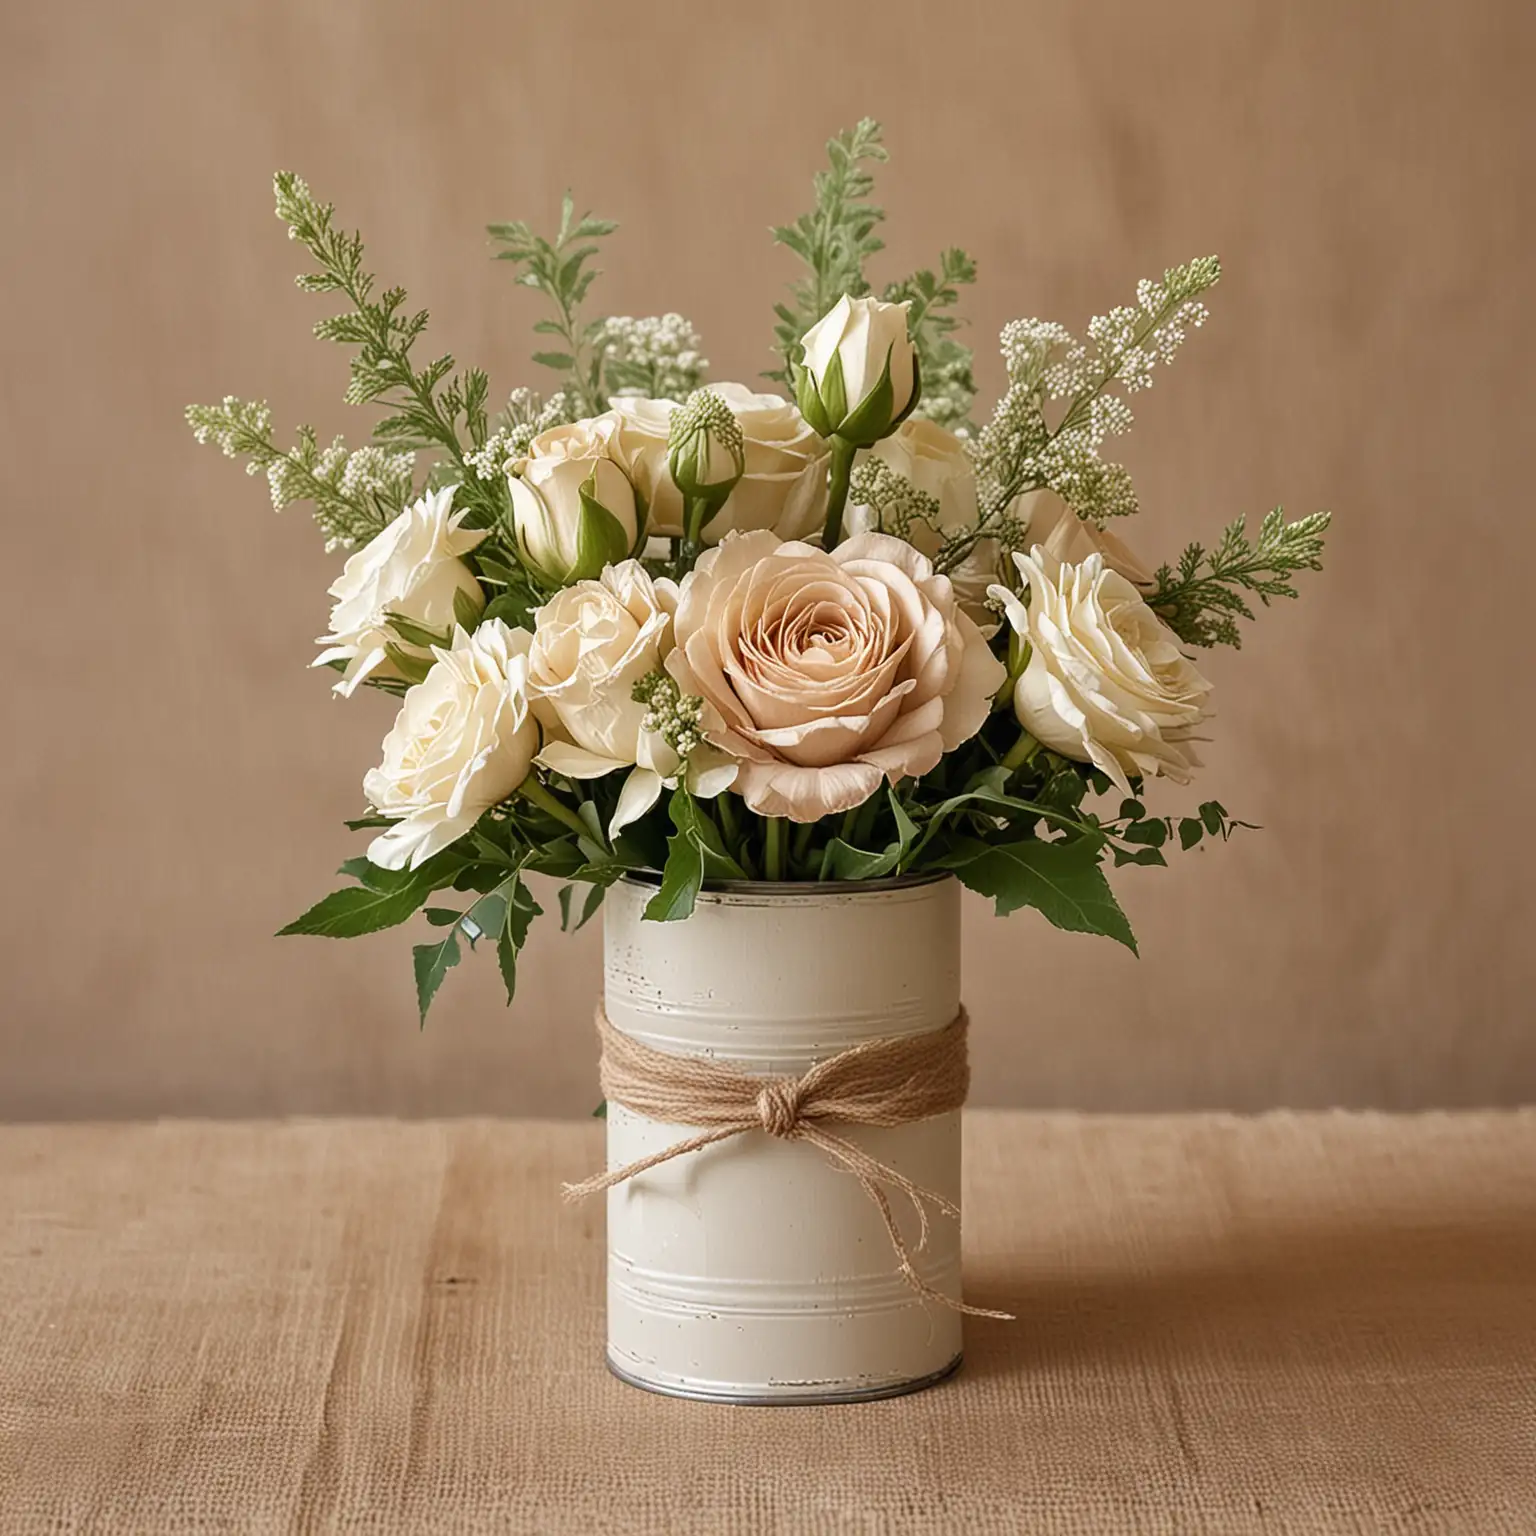 simple rustic tin can vase wedding centerpiece painted in shades of beige and holding rustic neutral bouquet; keep background neutral